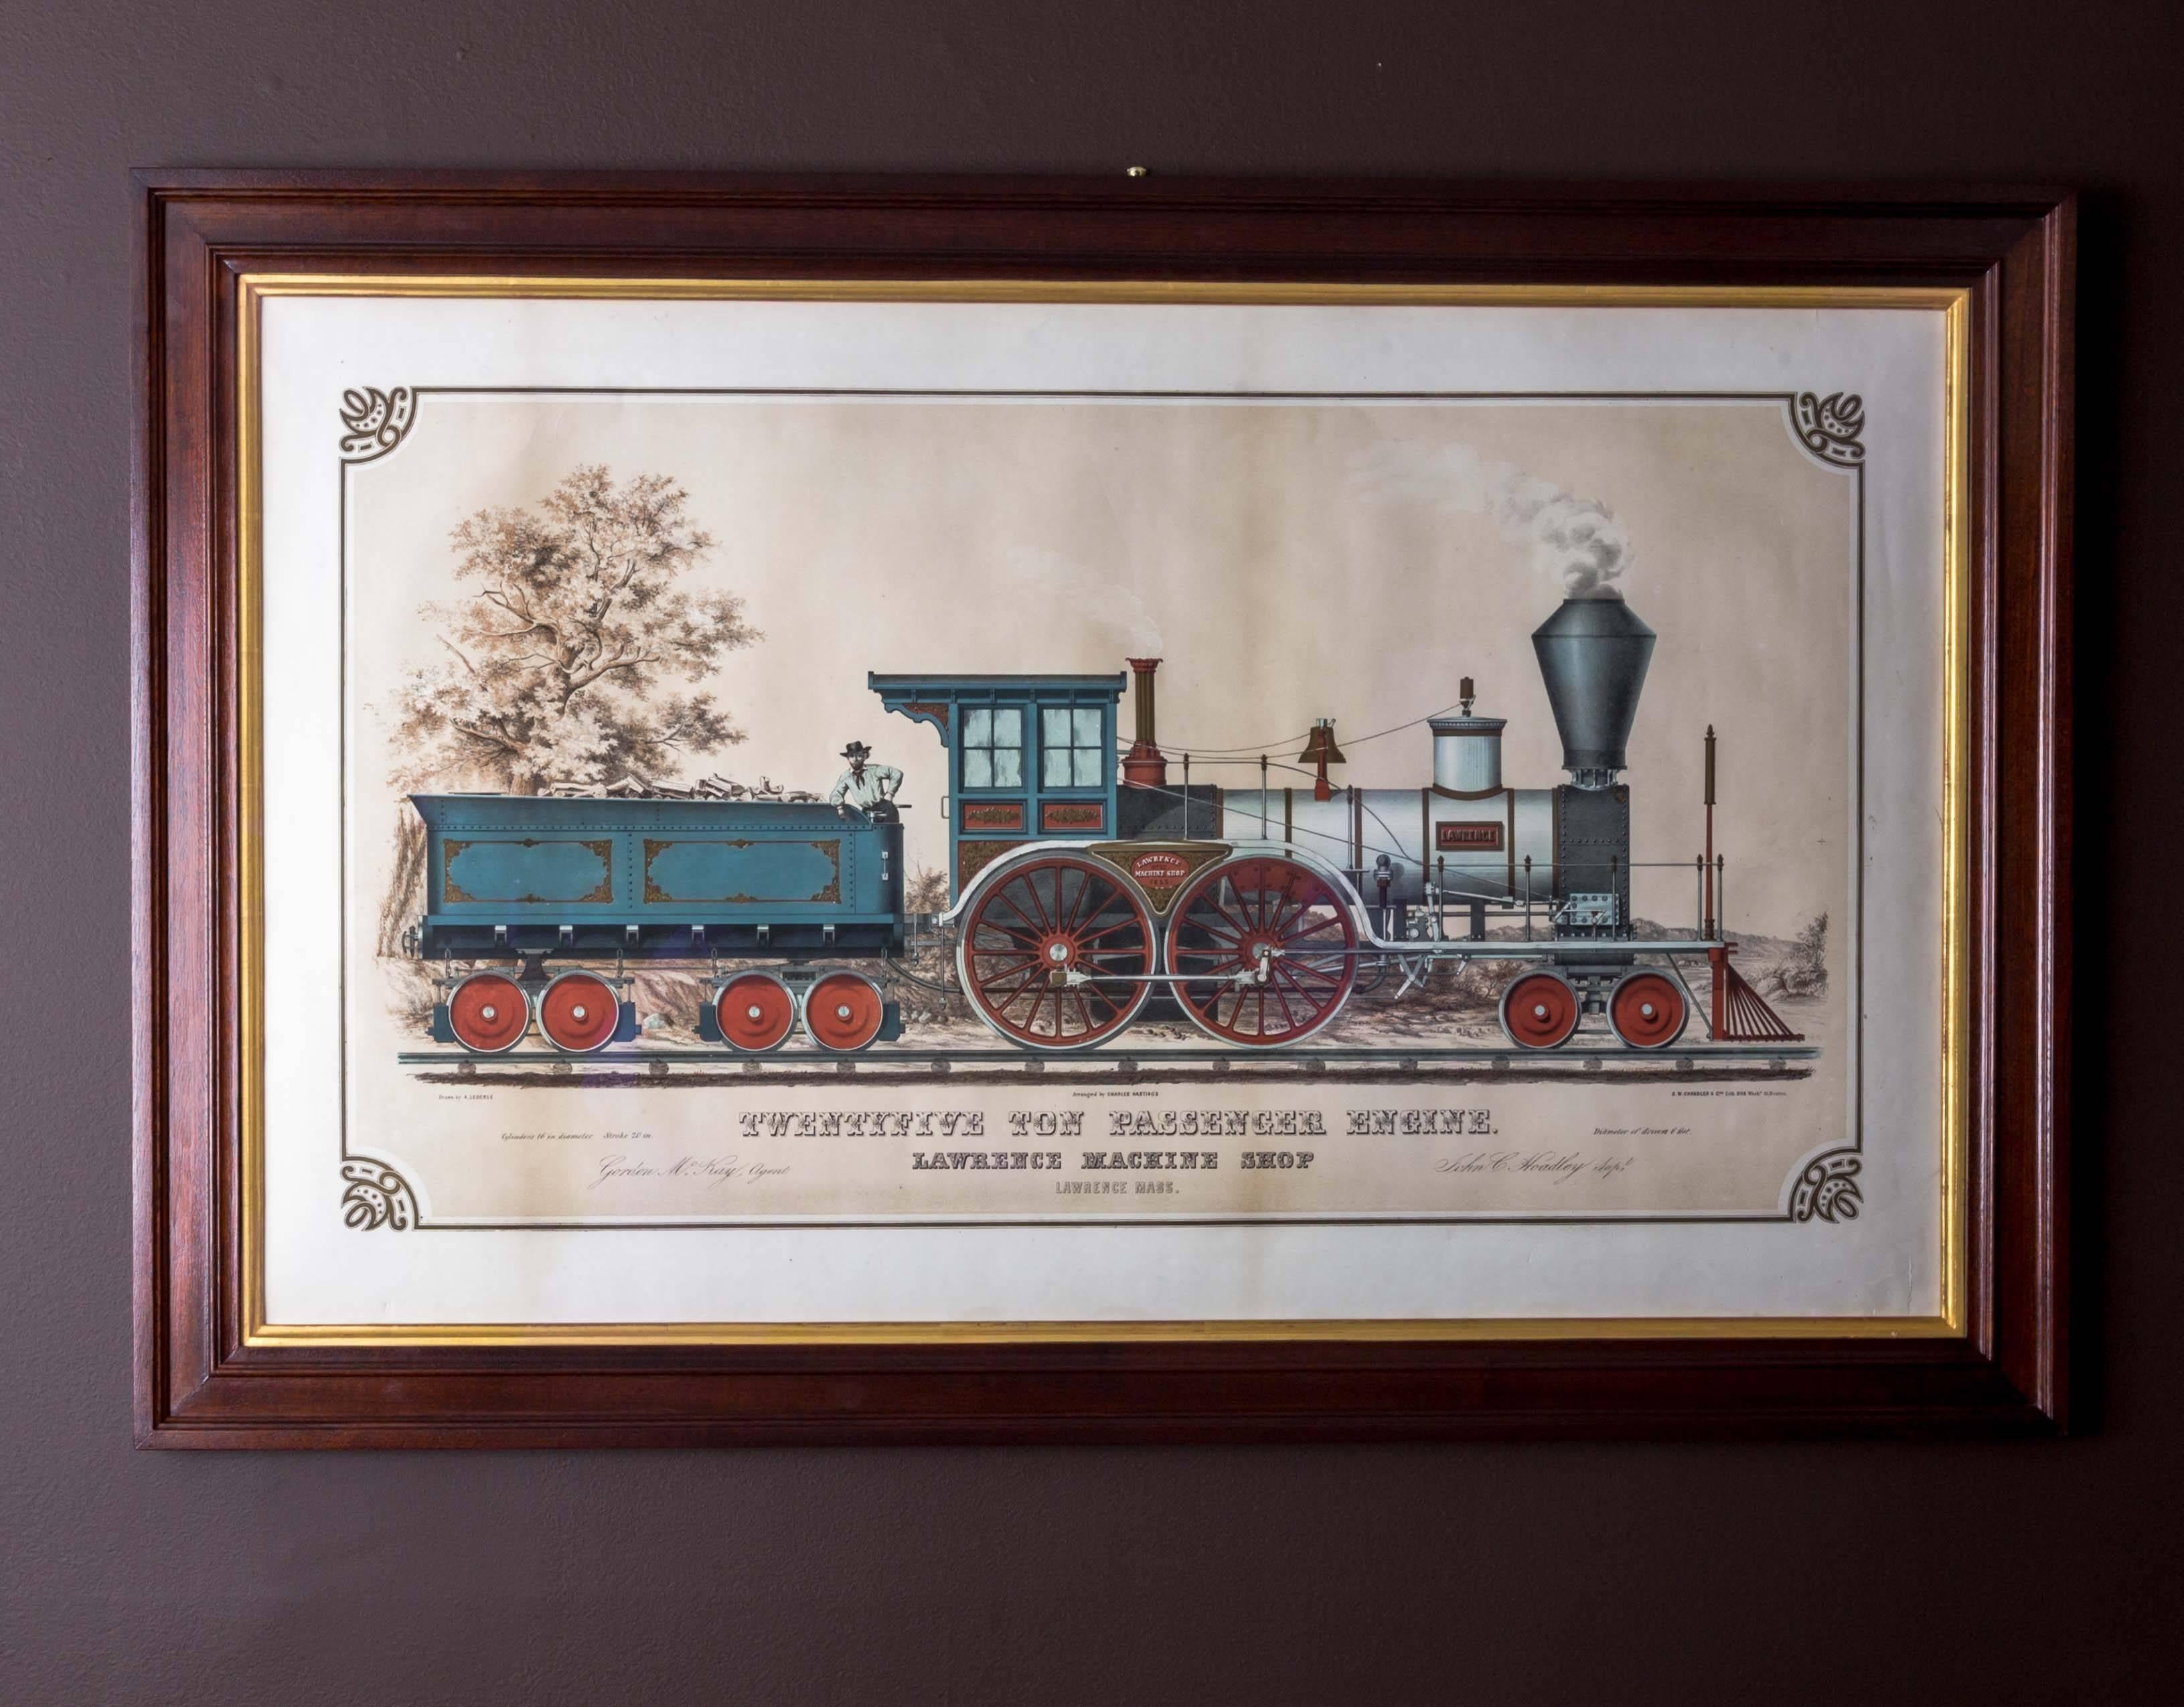 Charles Hastings train print drawn by A. Lederle, in the style of Currier and Ives
Locomotive.